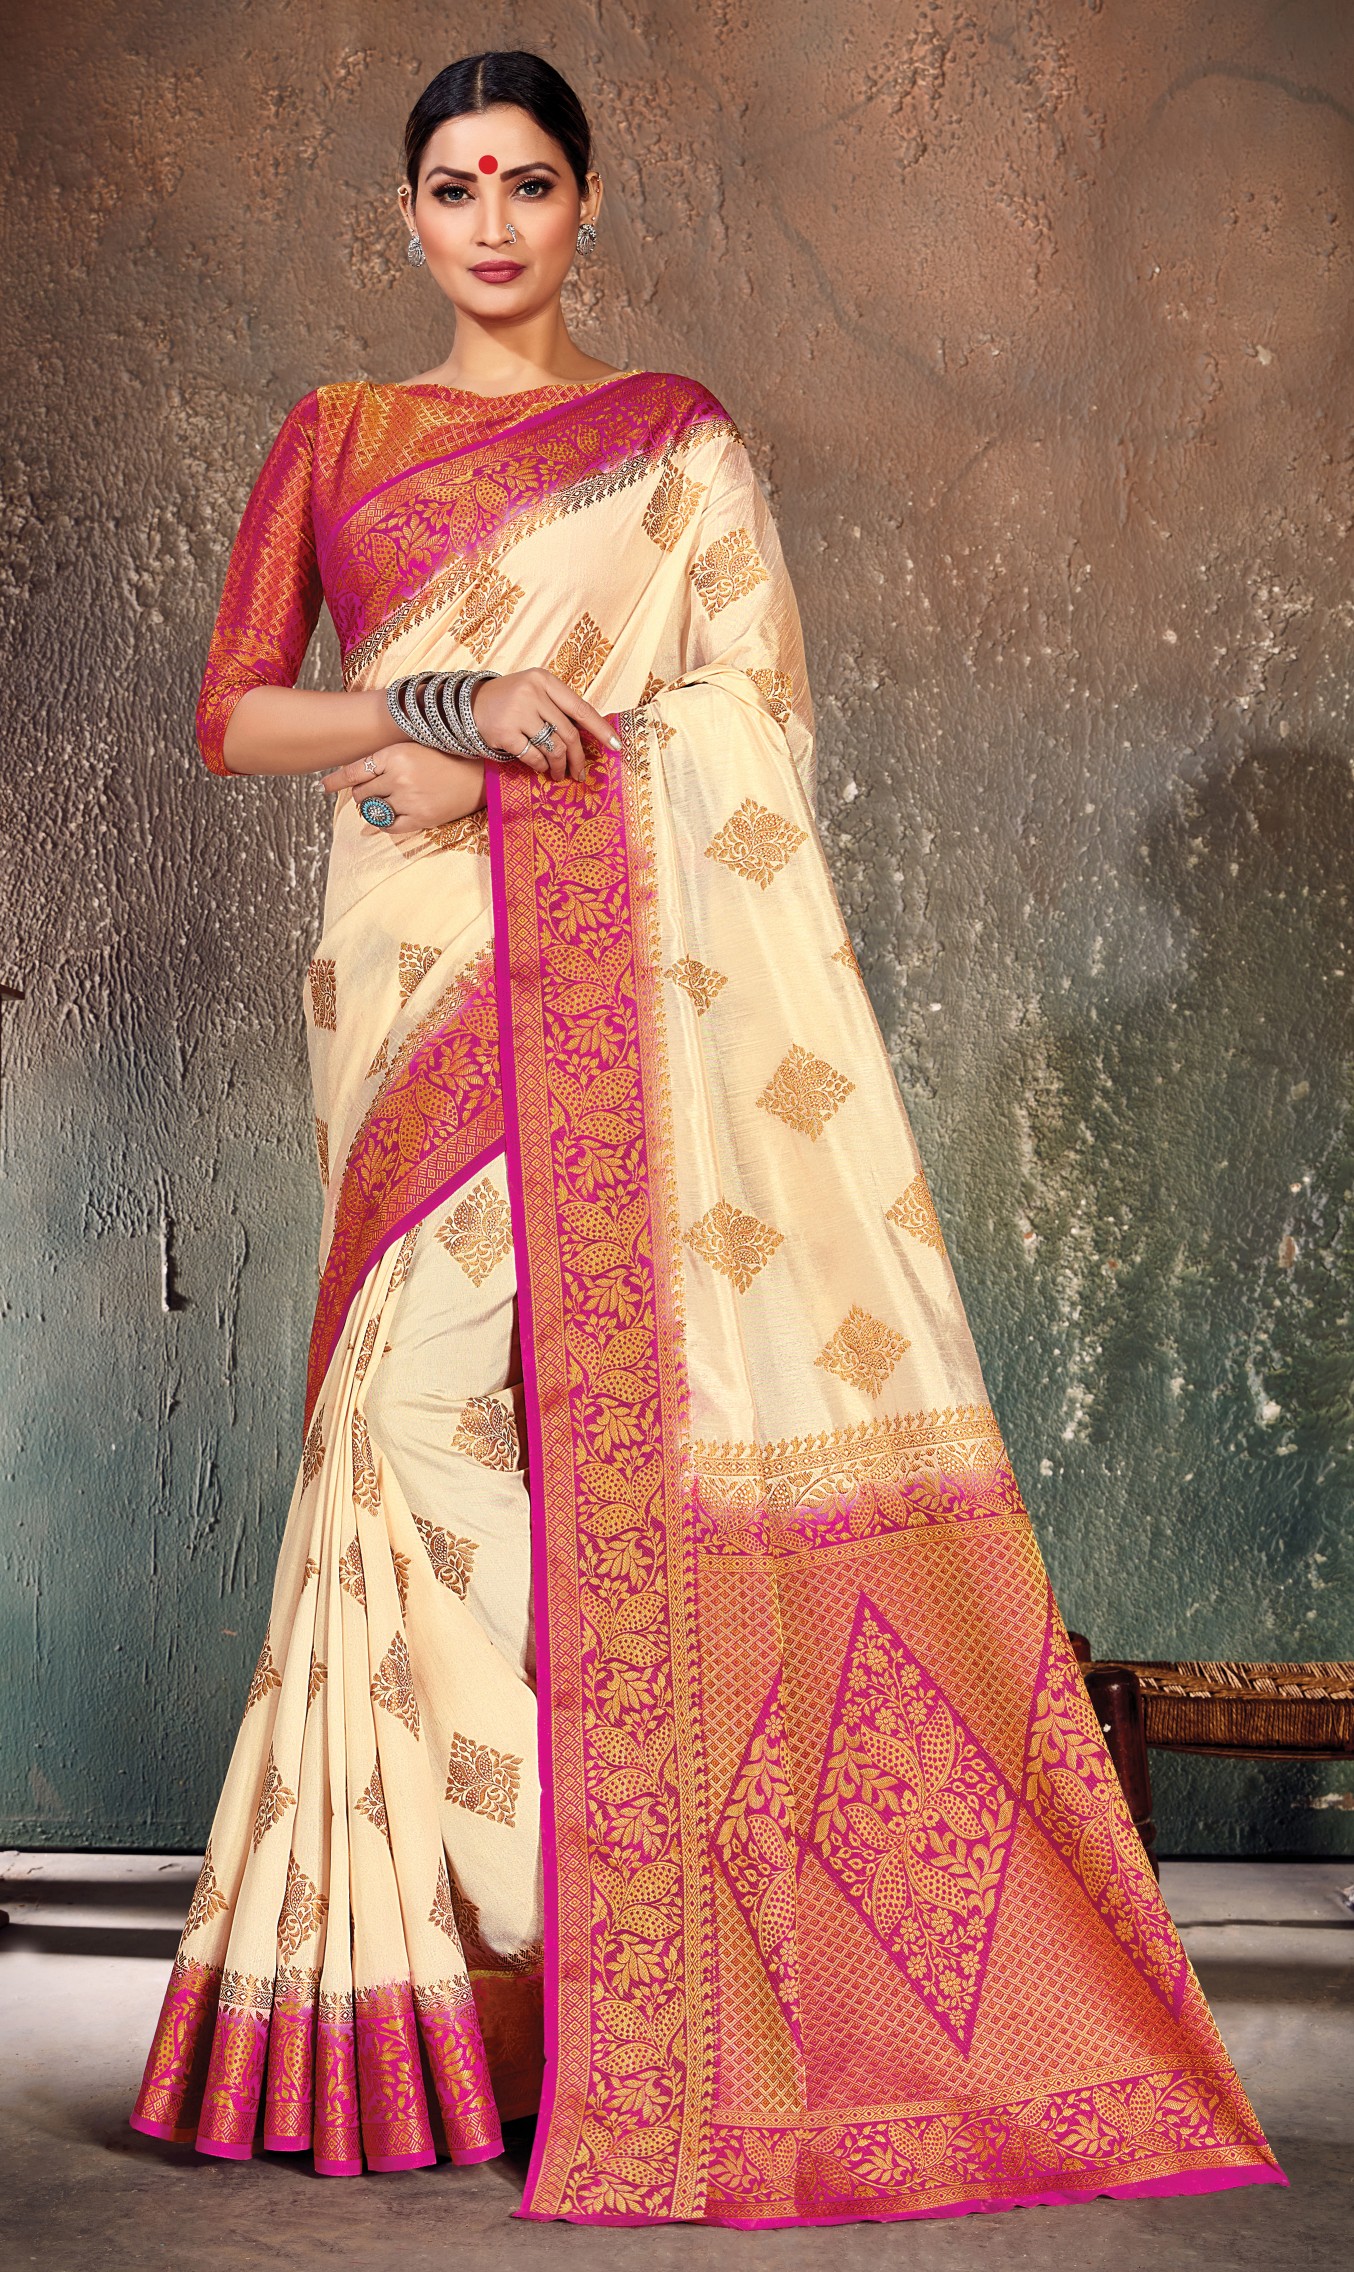 Exclusive Kannad Silk Sarees With Designer Pattern At Wholes...